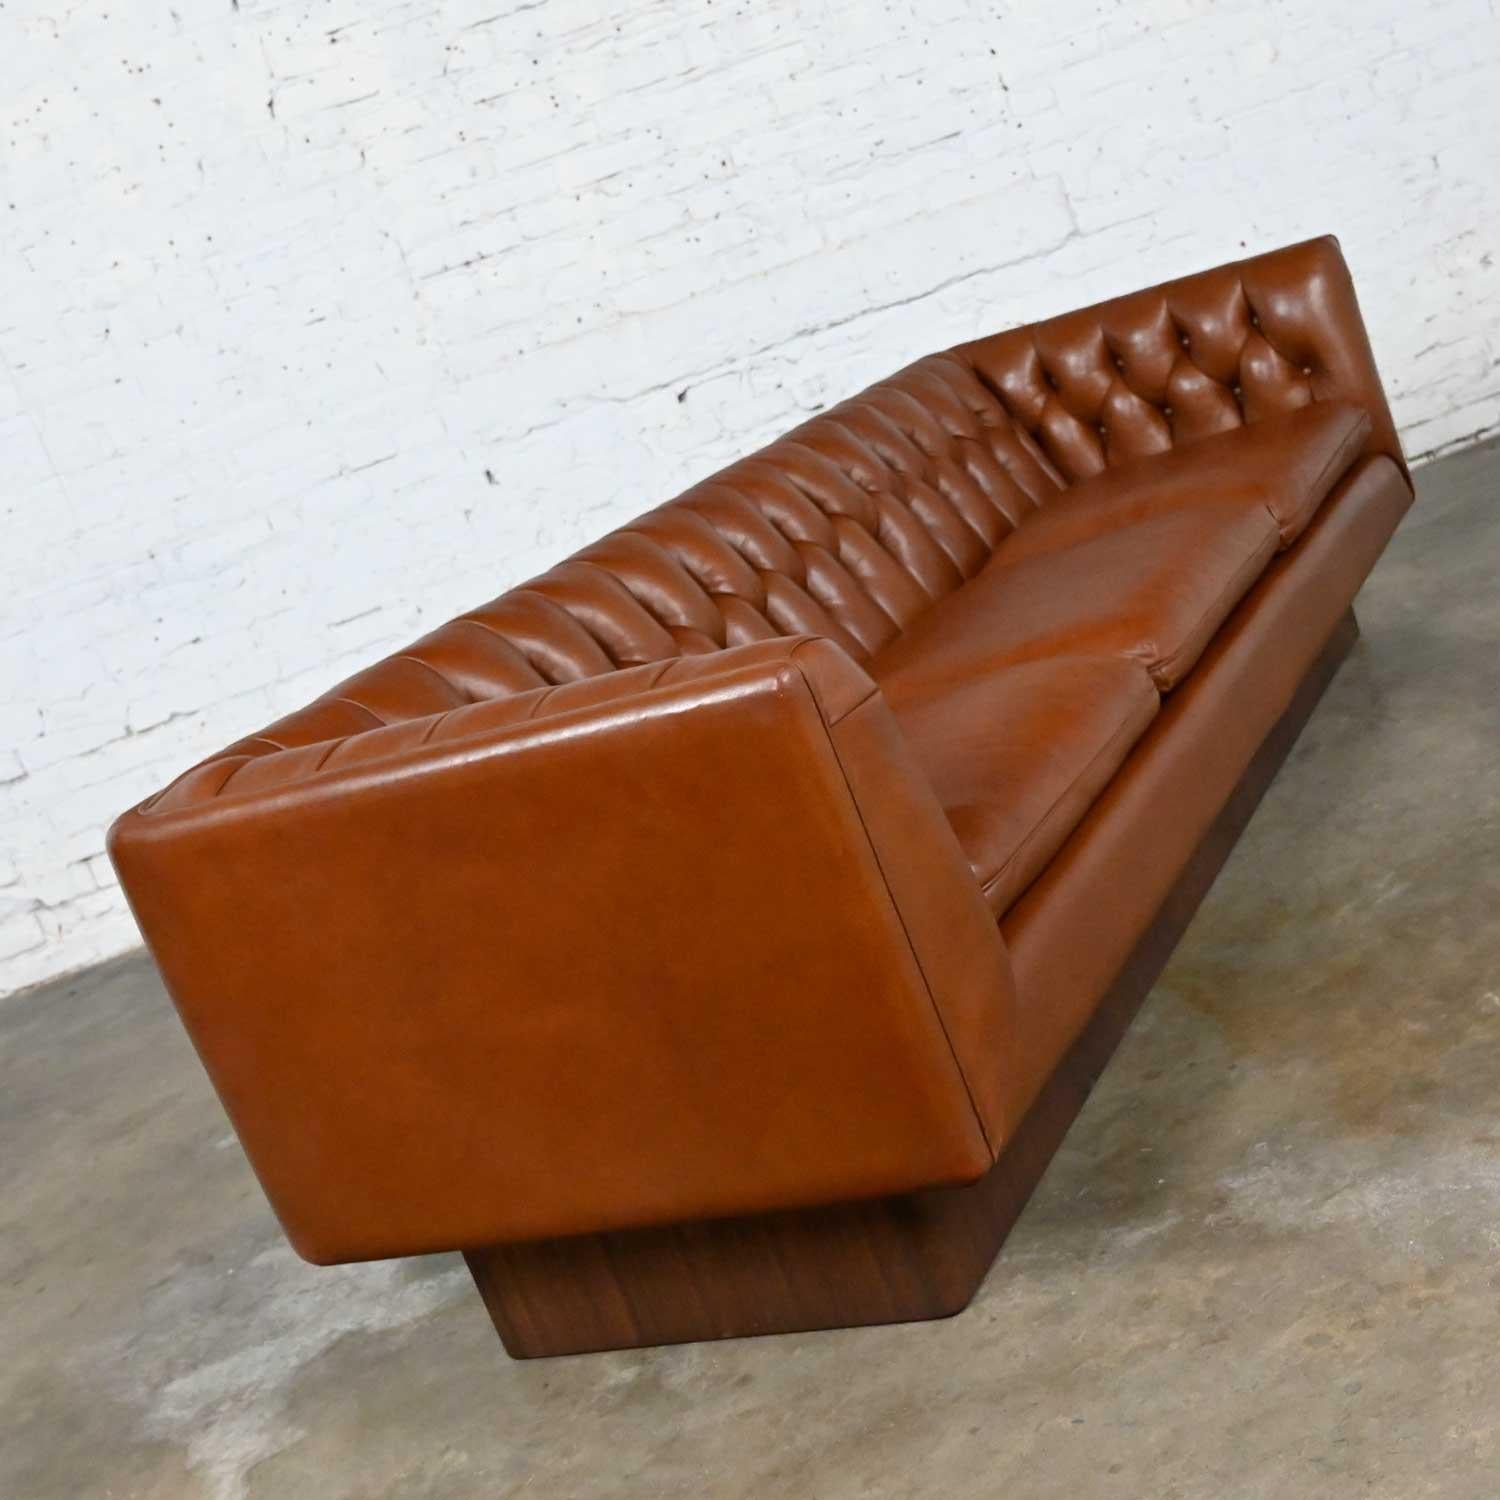 Stow & Davis Cognac Leather Modern Tuxedo Chesterfield Style Tufted Sofa In Good Condition For Sale In Topeka, KS